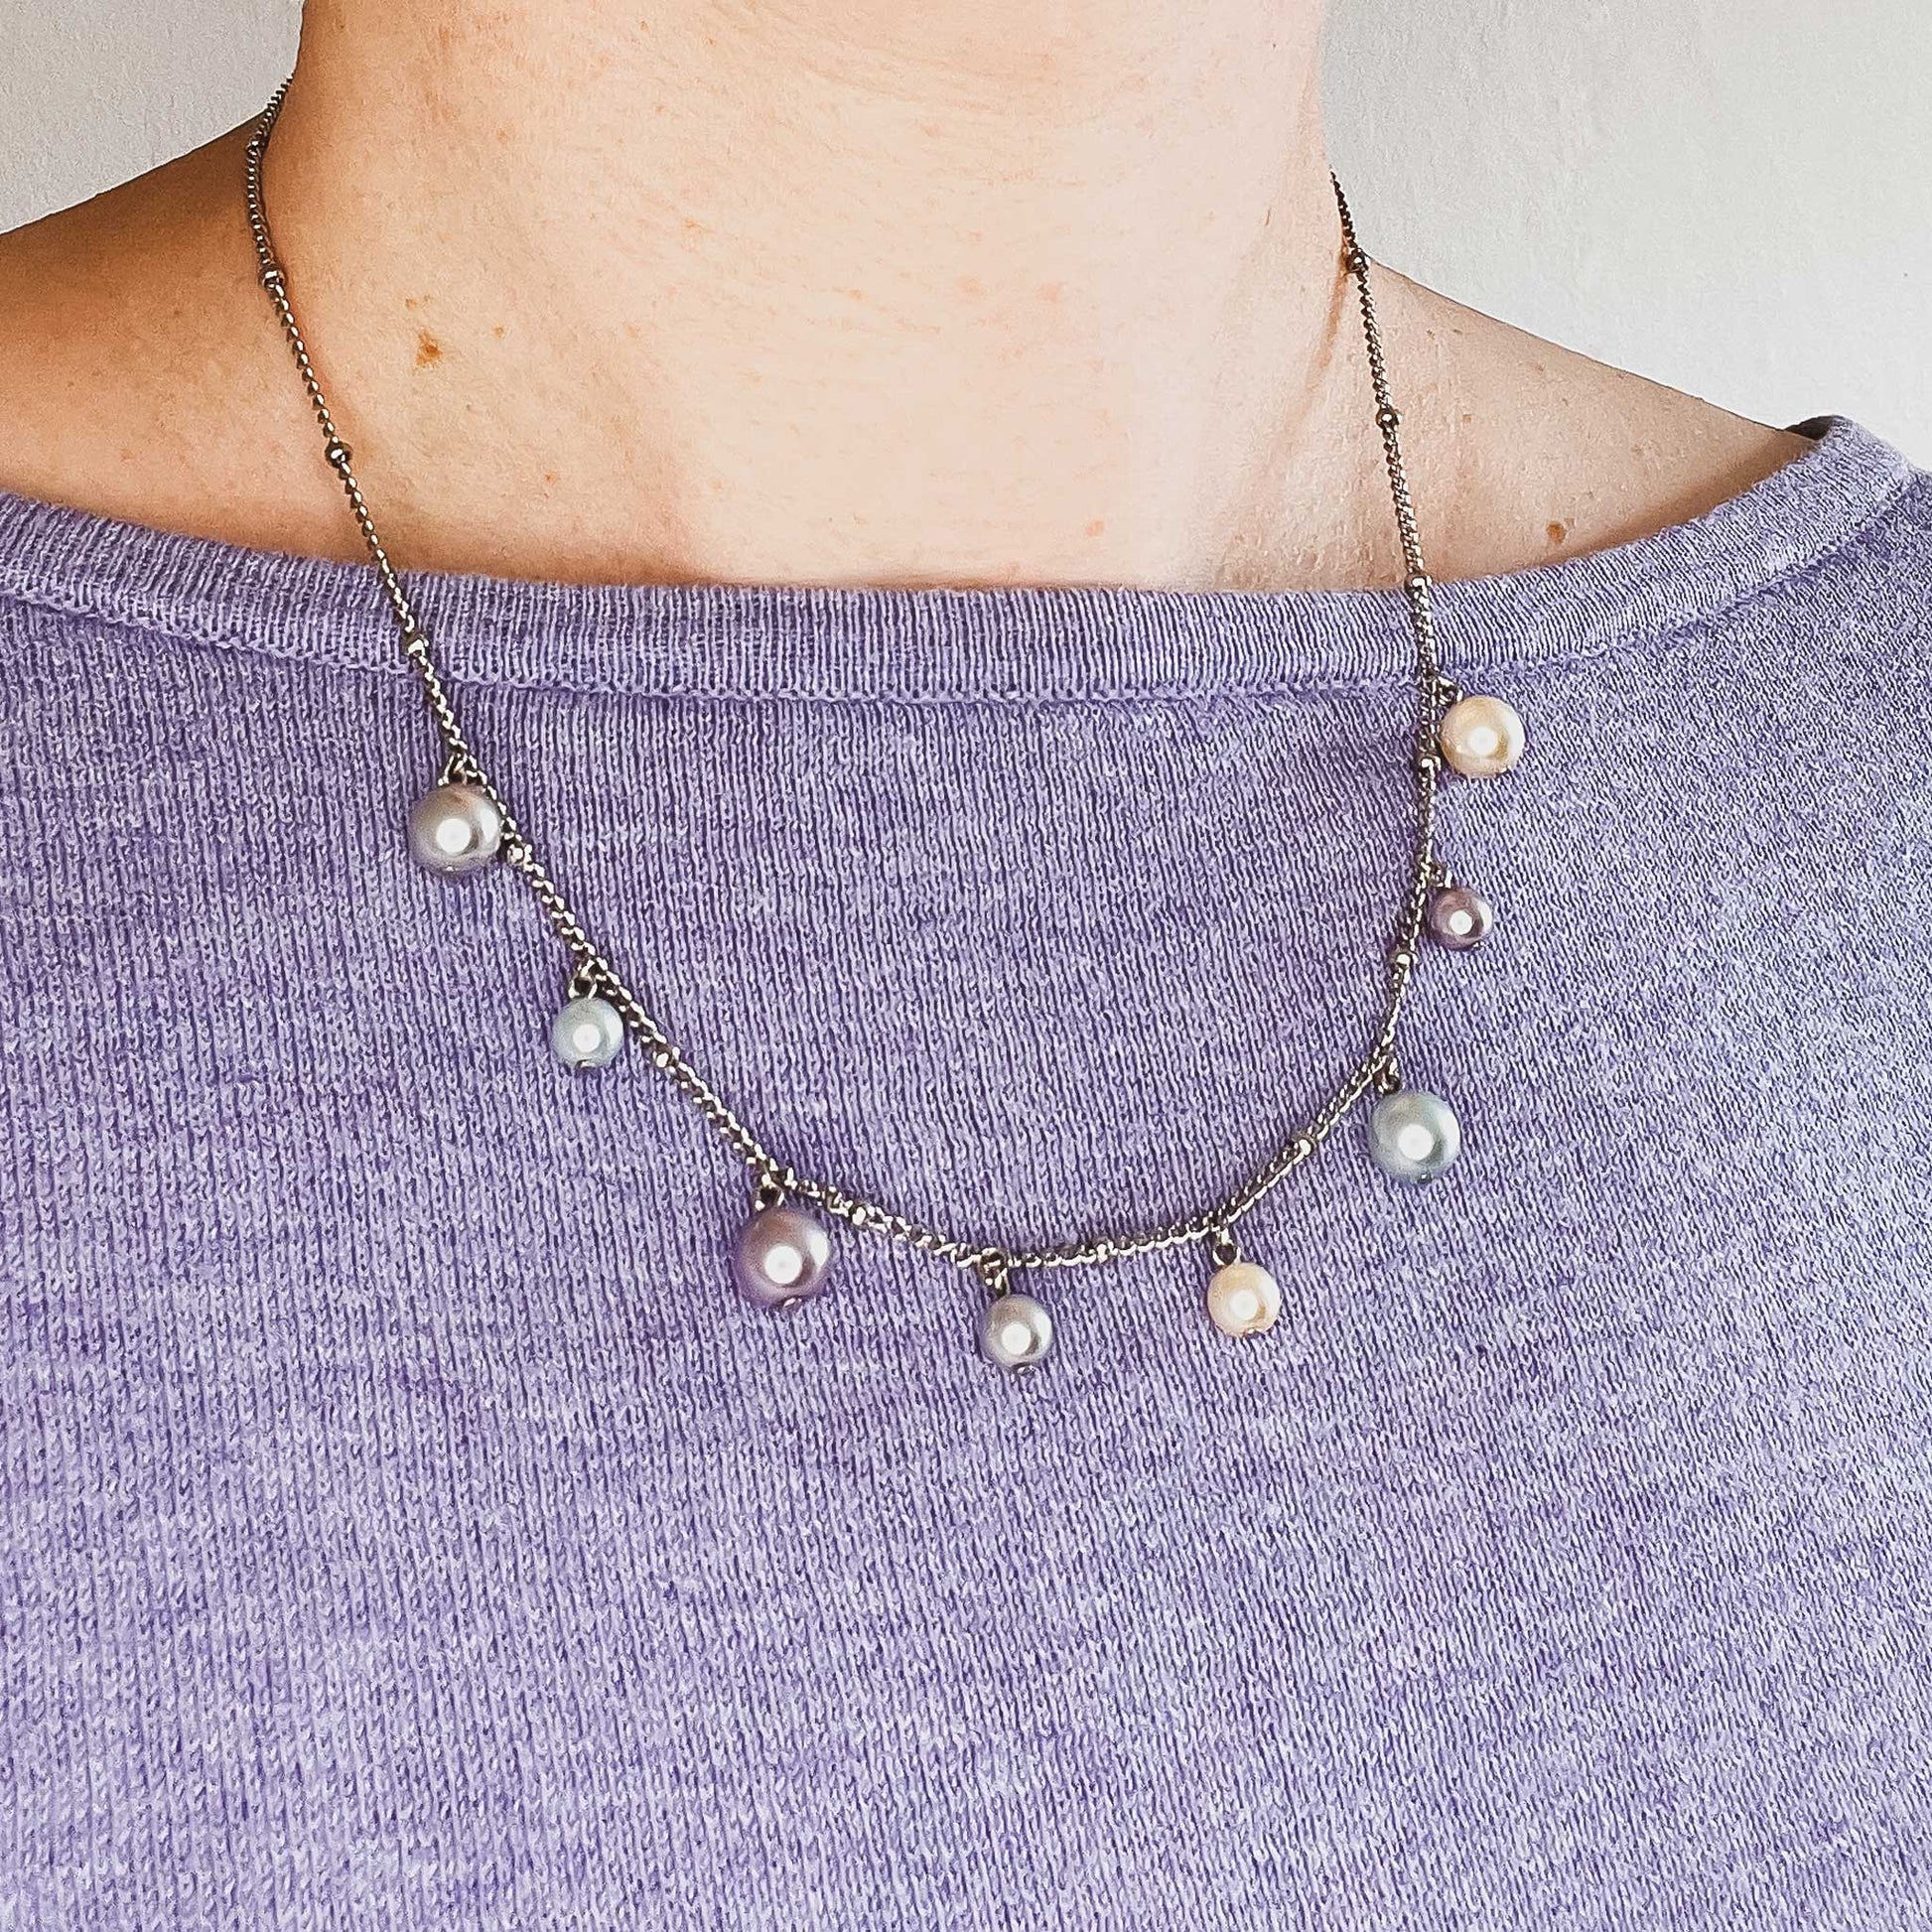 Woman wearing purple jumper and faux pearl charms necklace